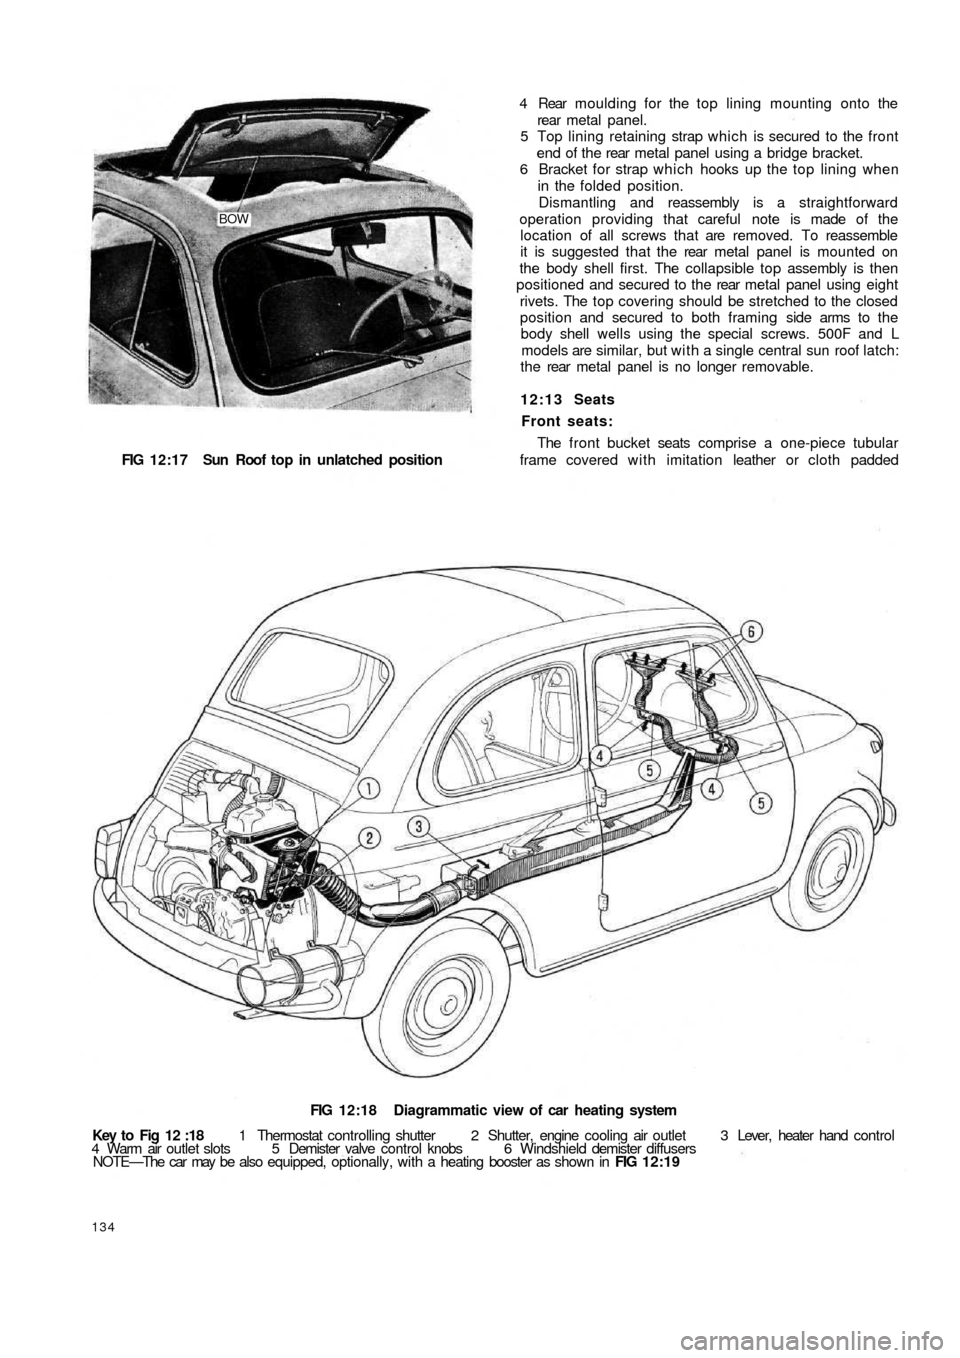 FIAT 500 1957 1.G Workshop Manual BOW
FIG 12:17  Sun Roof  top   in  unlatched position
FIG 12:18 Diagrammatic view of car heating system
Key to Fig 12 :18 1 Thermostat controlling shutter  2  Shutter,  engine  cooling air outlet  3 L